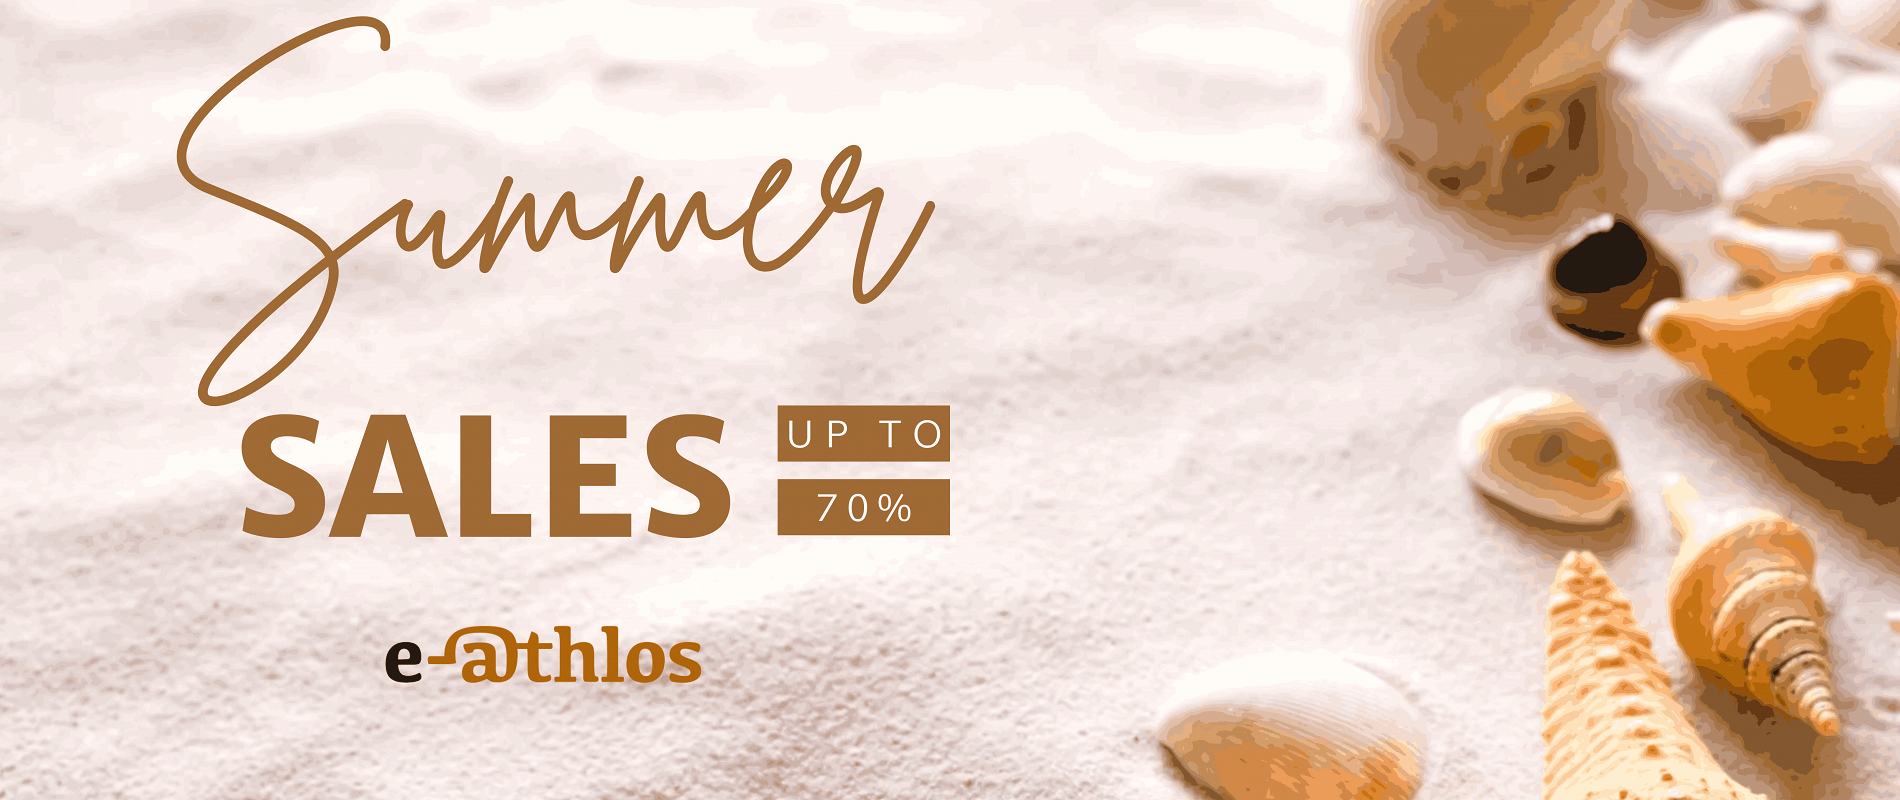 summer sales, e-athlos.gr, up to 70%